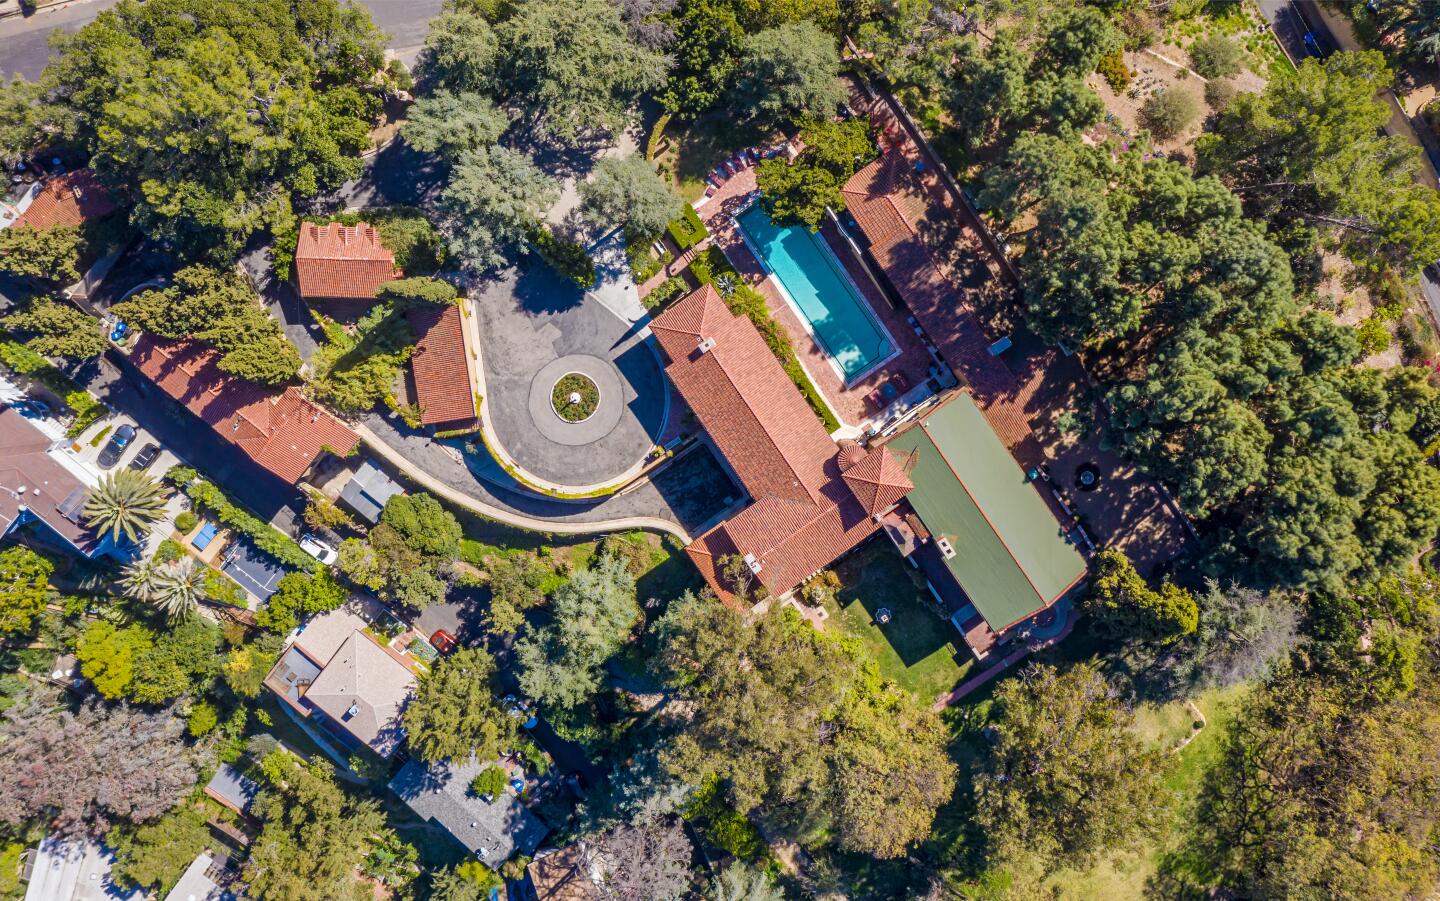 Aerial view of the estate.